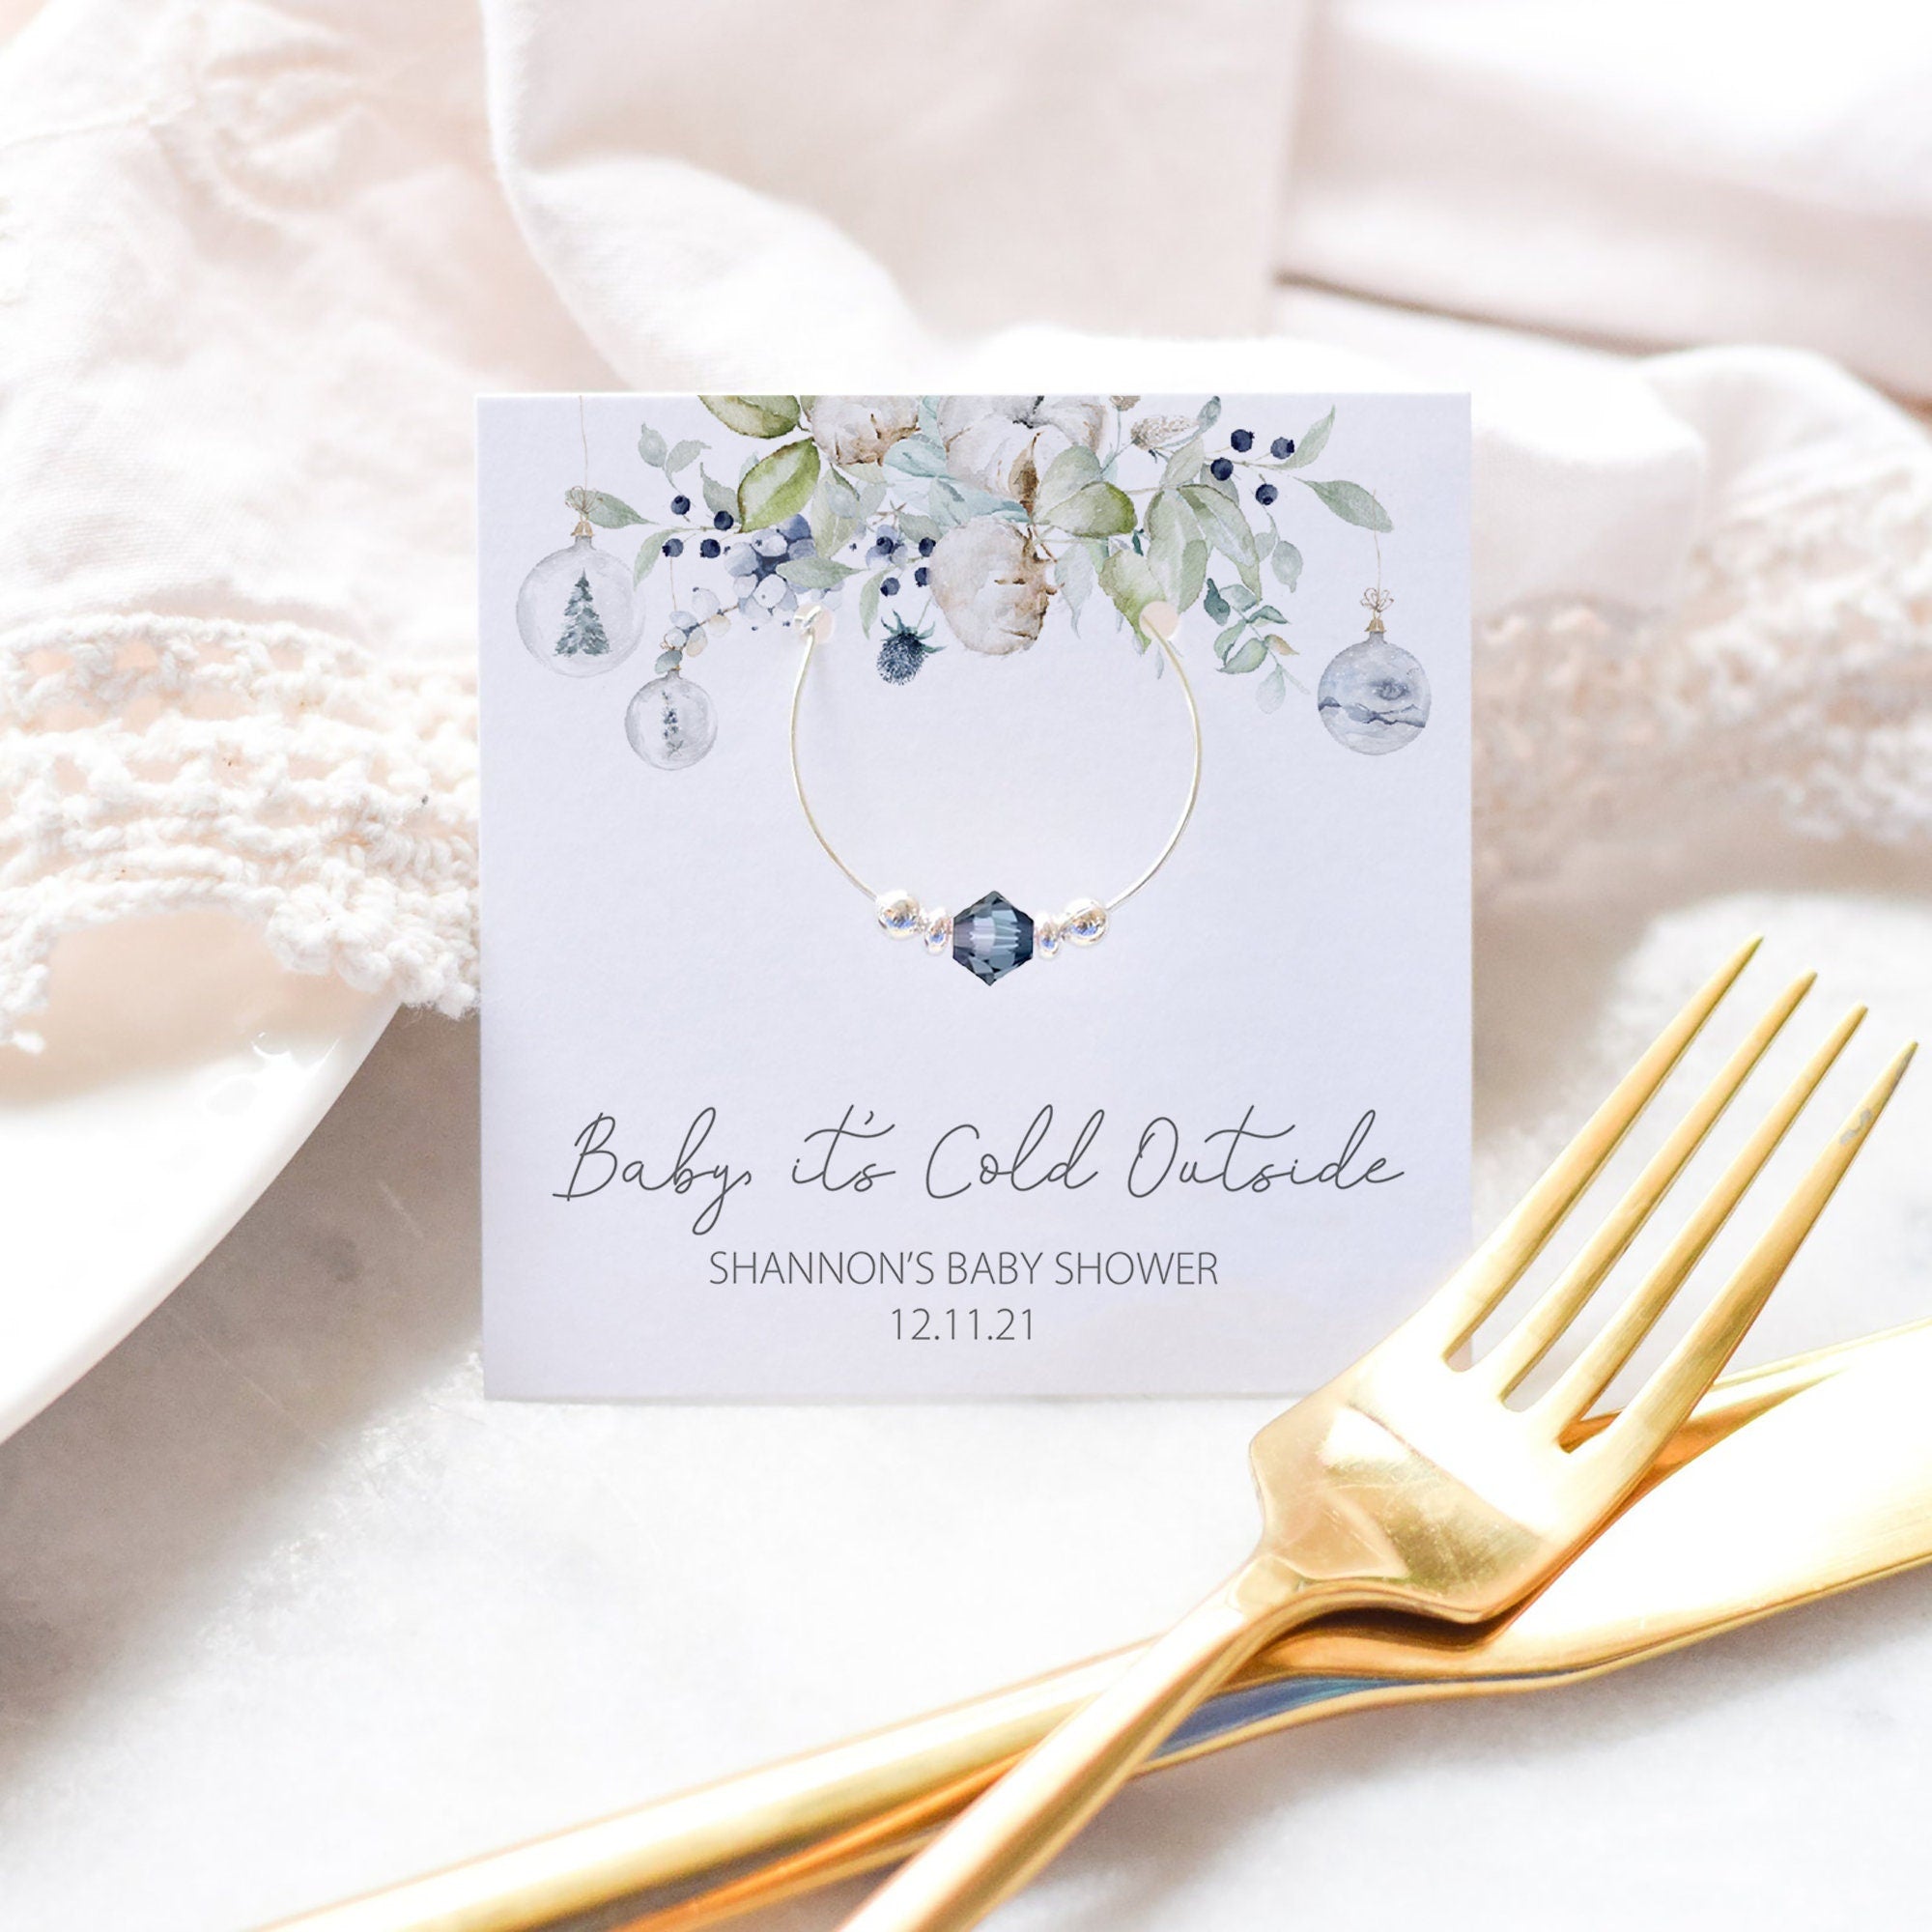 10 Winter Baby Shower Favors that Celebrate the Season